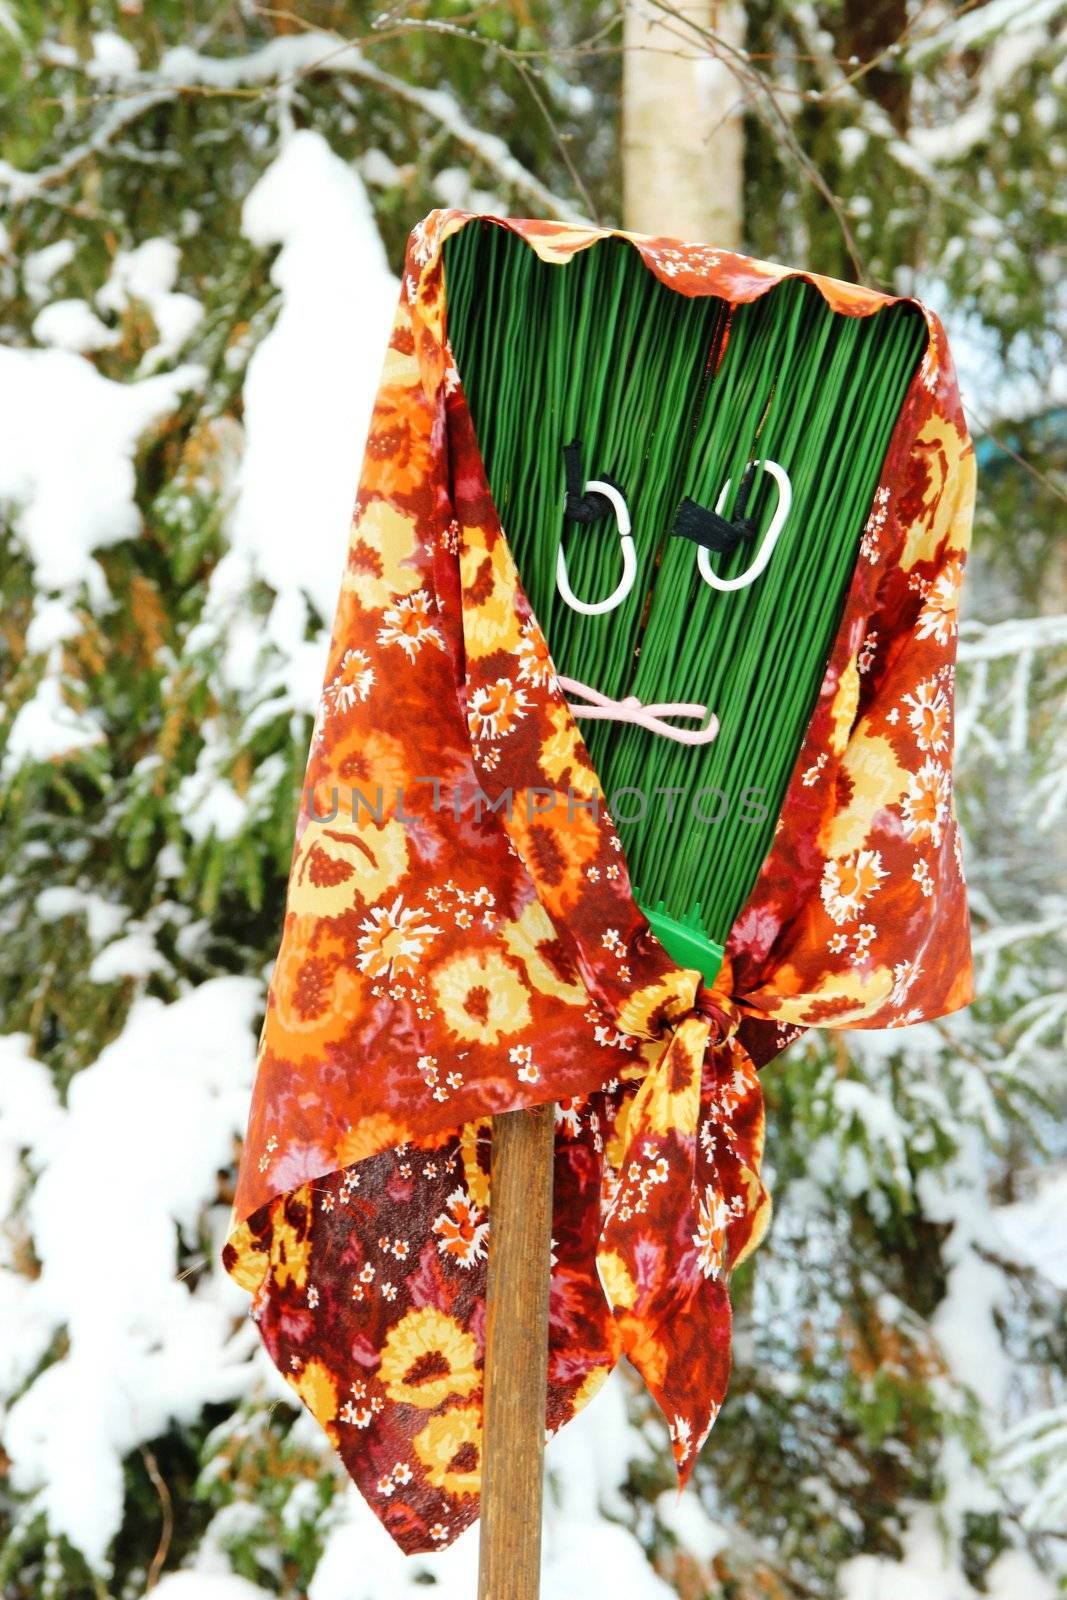 Funny broom with an ugly face in winter by Metanna